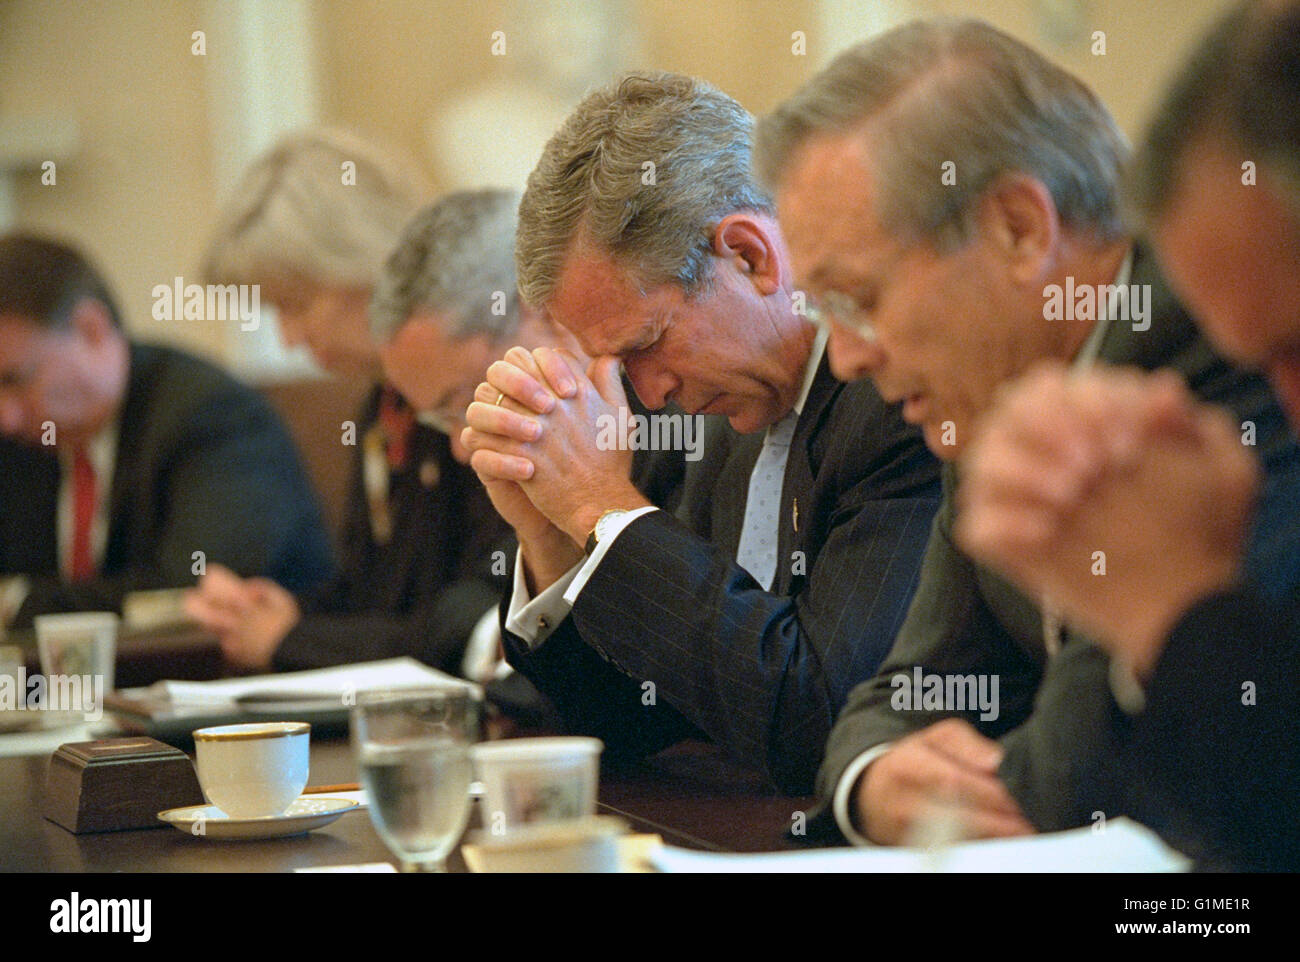 U.S President George W. Bush bows his head as Secretary of Defense Donald Rumsfeld, right, says a prayer before the start of a cabinet meeting in the Cabinet Room of the White House September 14, 2001 in Washington, DC. This was the first meeting of the full cabinet following the terror attacks on September 11th. Stock Photo